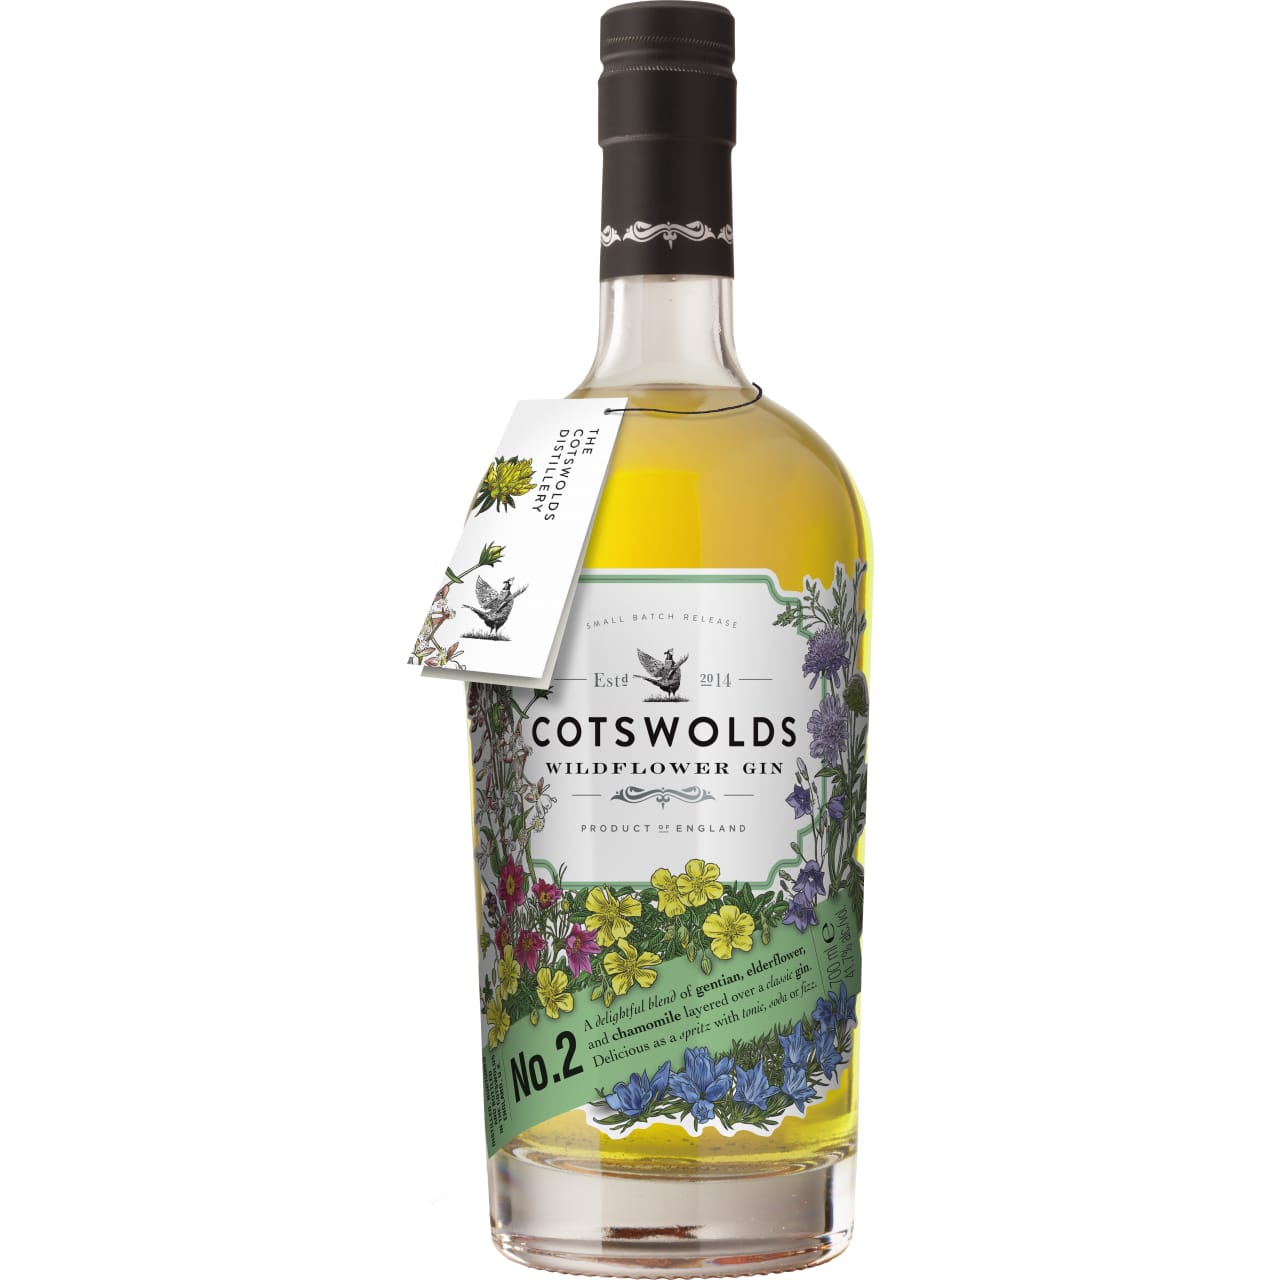 Product Image - Cotswolds Wildflower Gin No. 2